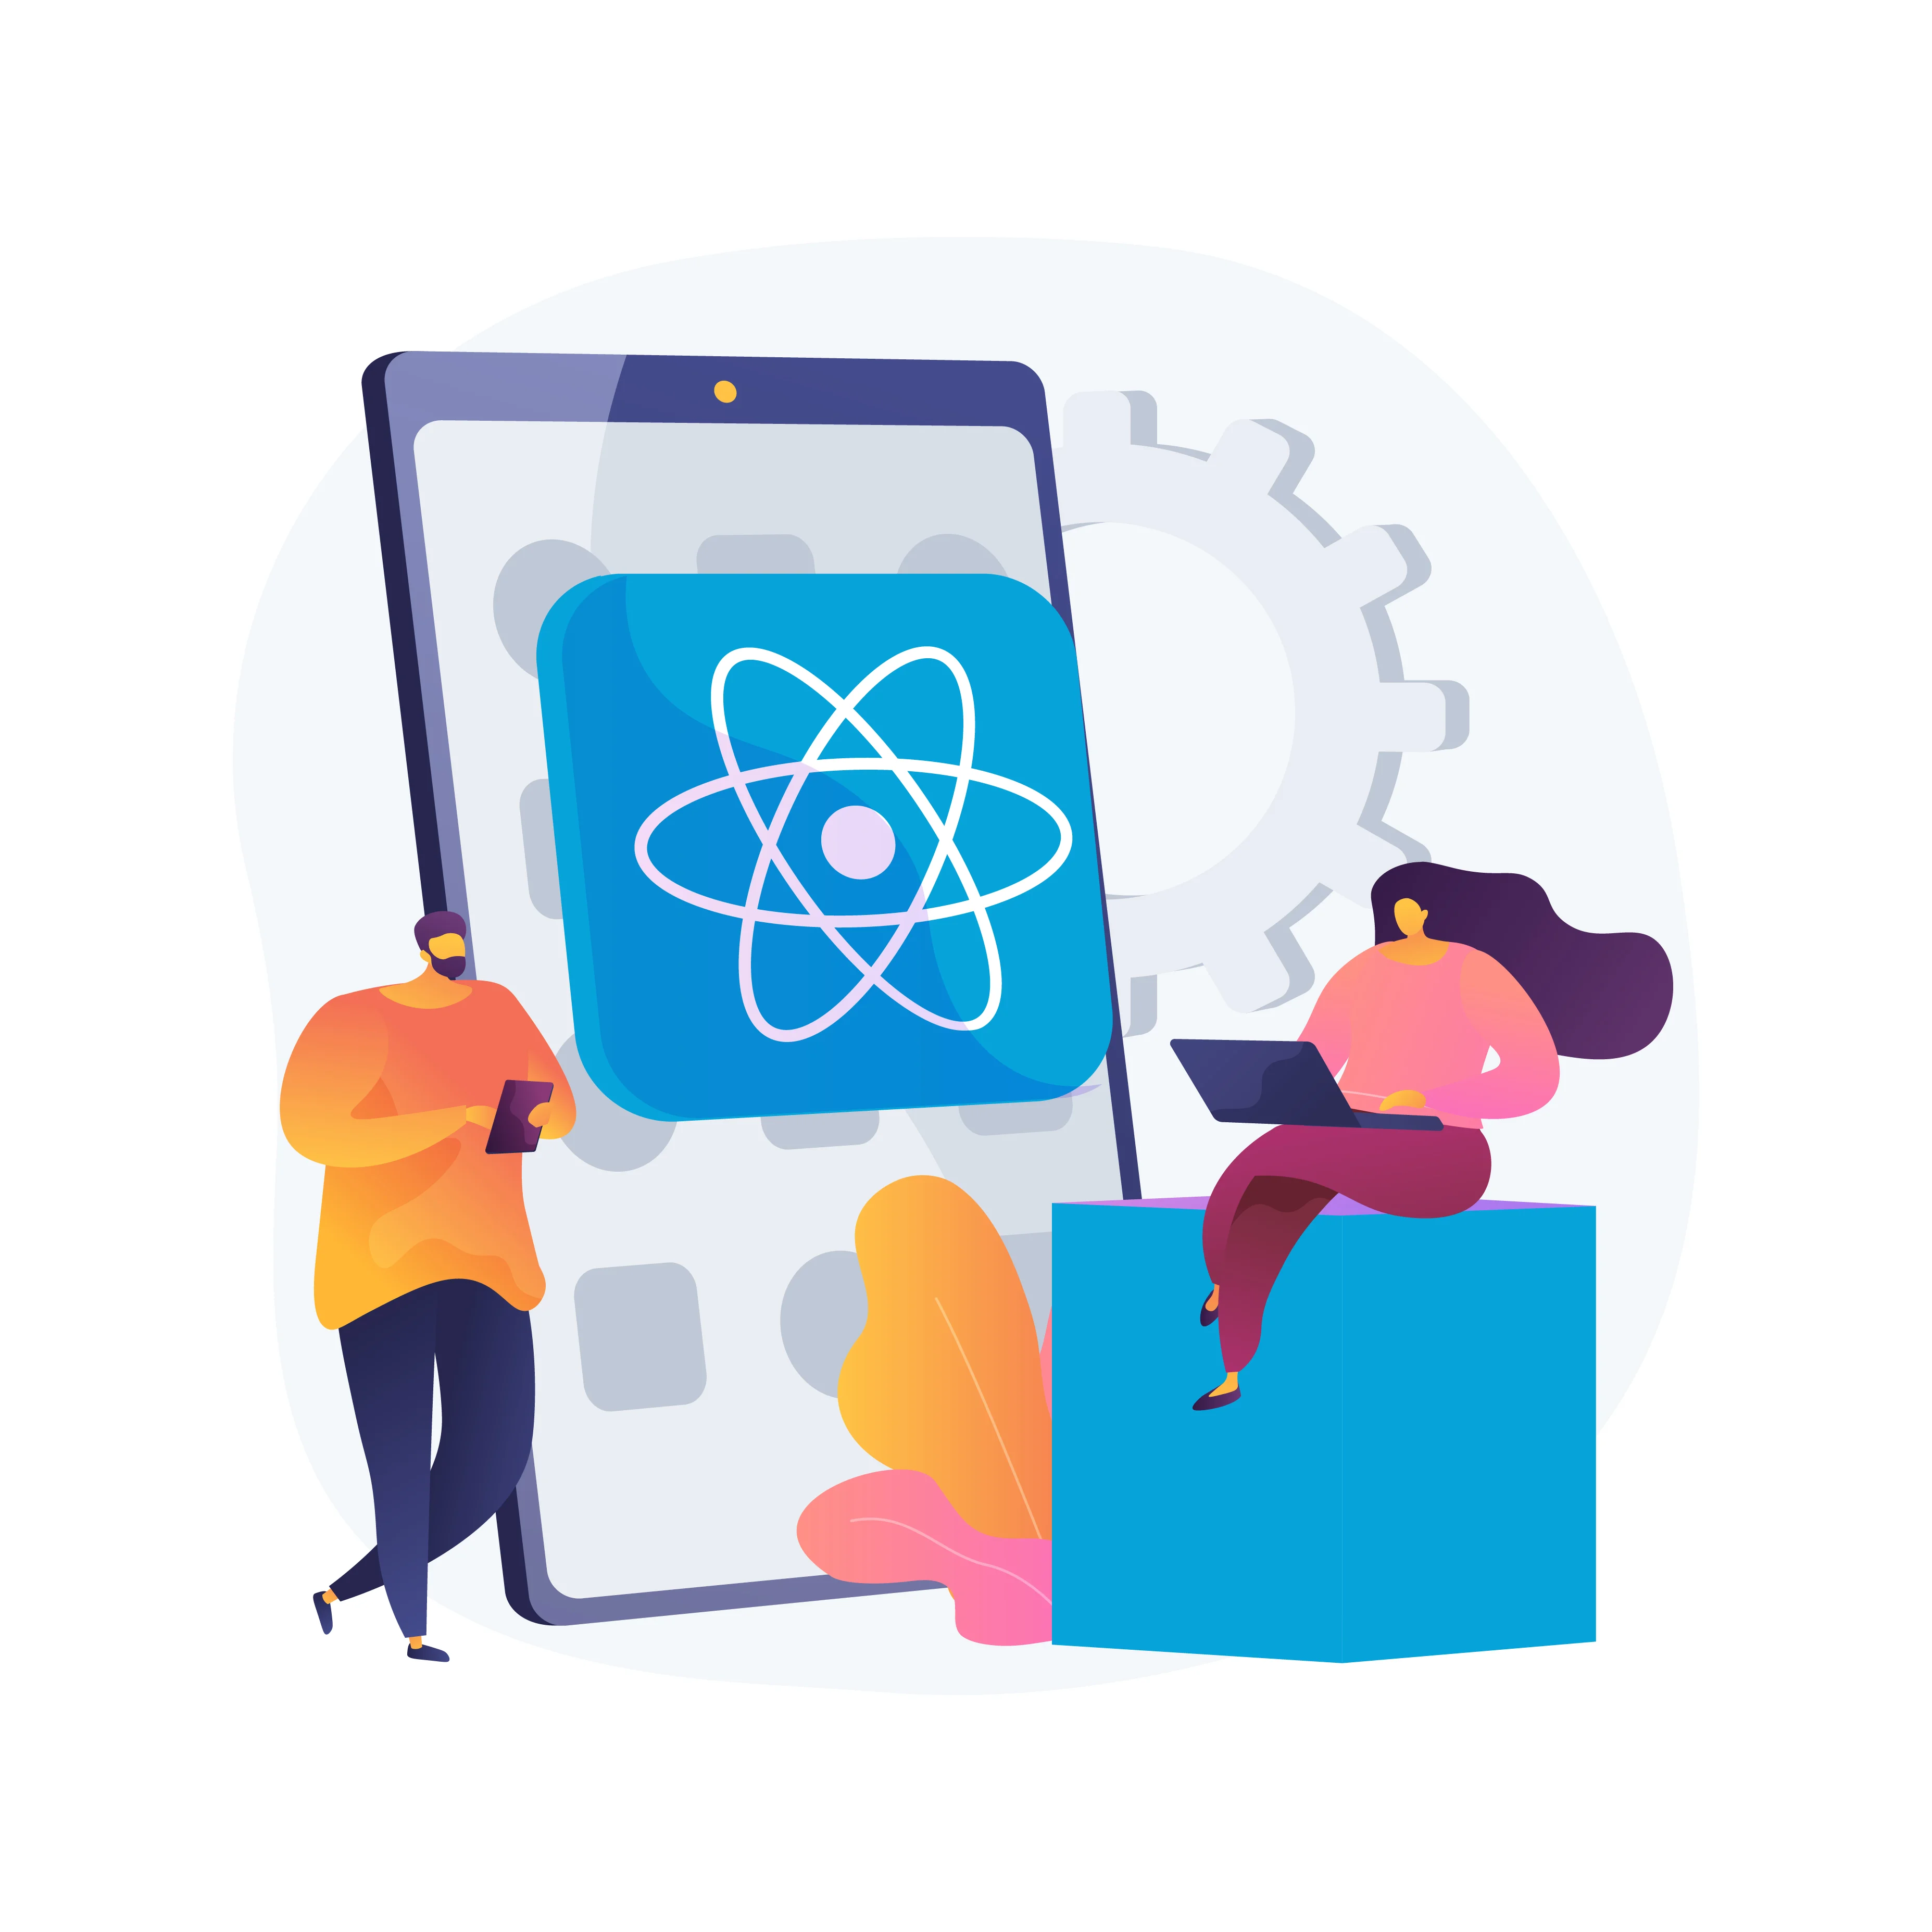 React Development Services in India,React Deveopment Company in India